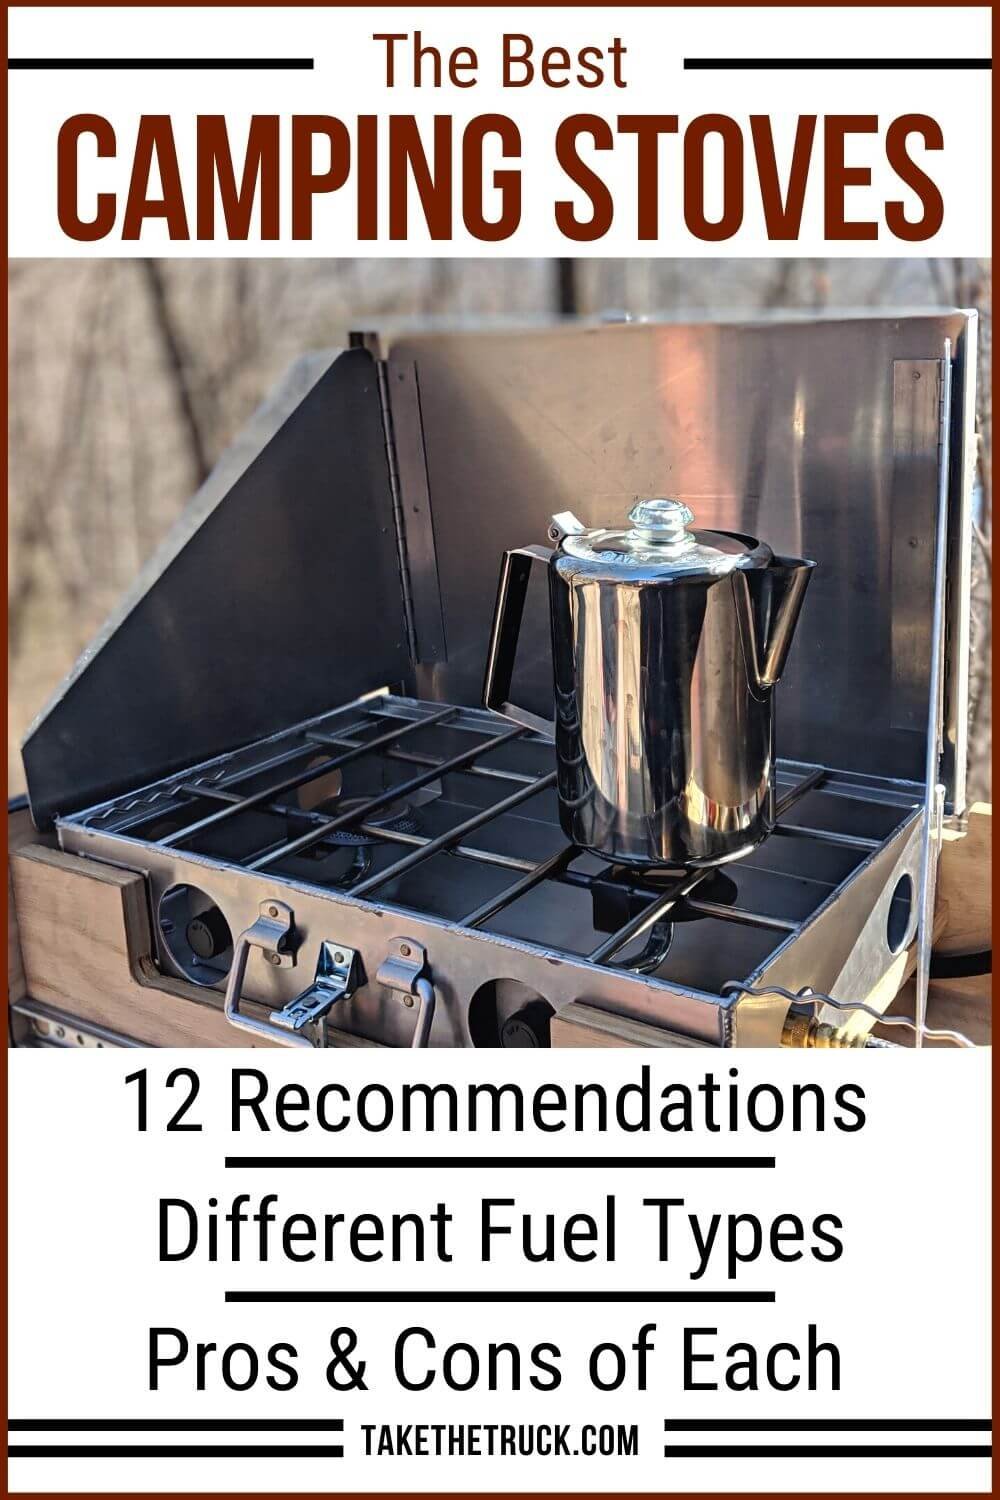 The 12 best camp stoves organized by fuel type: gas camp stoves, wood burning camp stoves, alcohol camp stoves, propane camping stoves, butane camping stoves, canister stoves for camping.